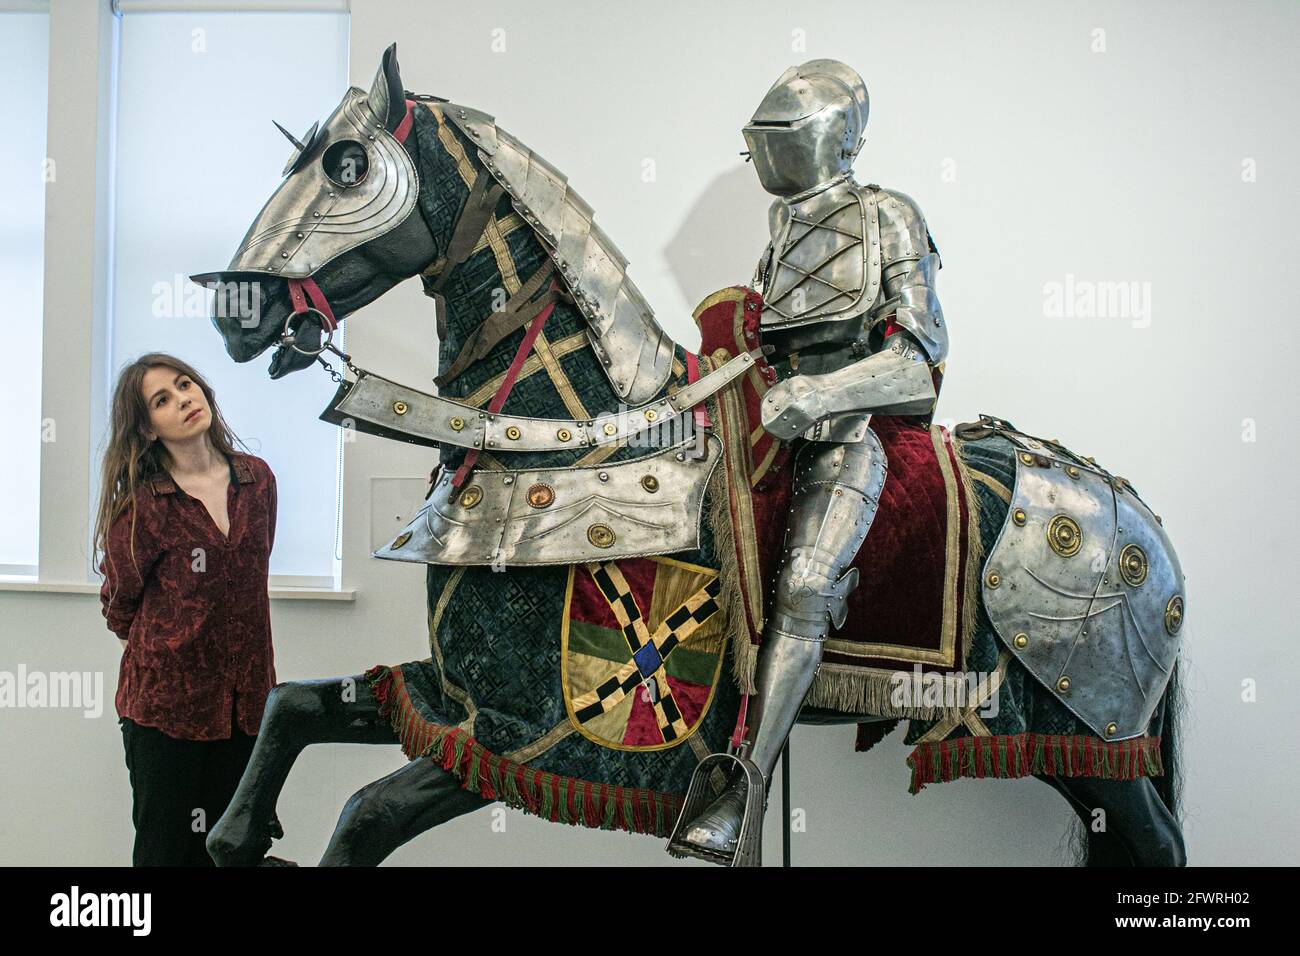 BONHAMS KNIGHTSBRIDGE LONDON 24 May 2021. Bonhams assistants pose with an equestrian full armour for man and horse in German late 16th century style during a preview of Bonhams Antique Arms and Armour Sale. Built as an accurate reproduction inspired by two sets of armours on display in the world-famous Wallace Collection in London, this armour is an impressive, decorative example of a type that has not come onto the market since the 19th century. Estimate: £15,000 – 20,000. The sale will take place on 26 May at Bonhams Knightsbridge. Credit amer ghazzal/Alamy Live News Stock Photo